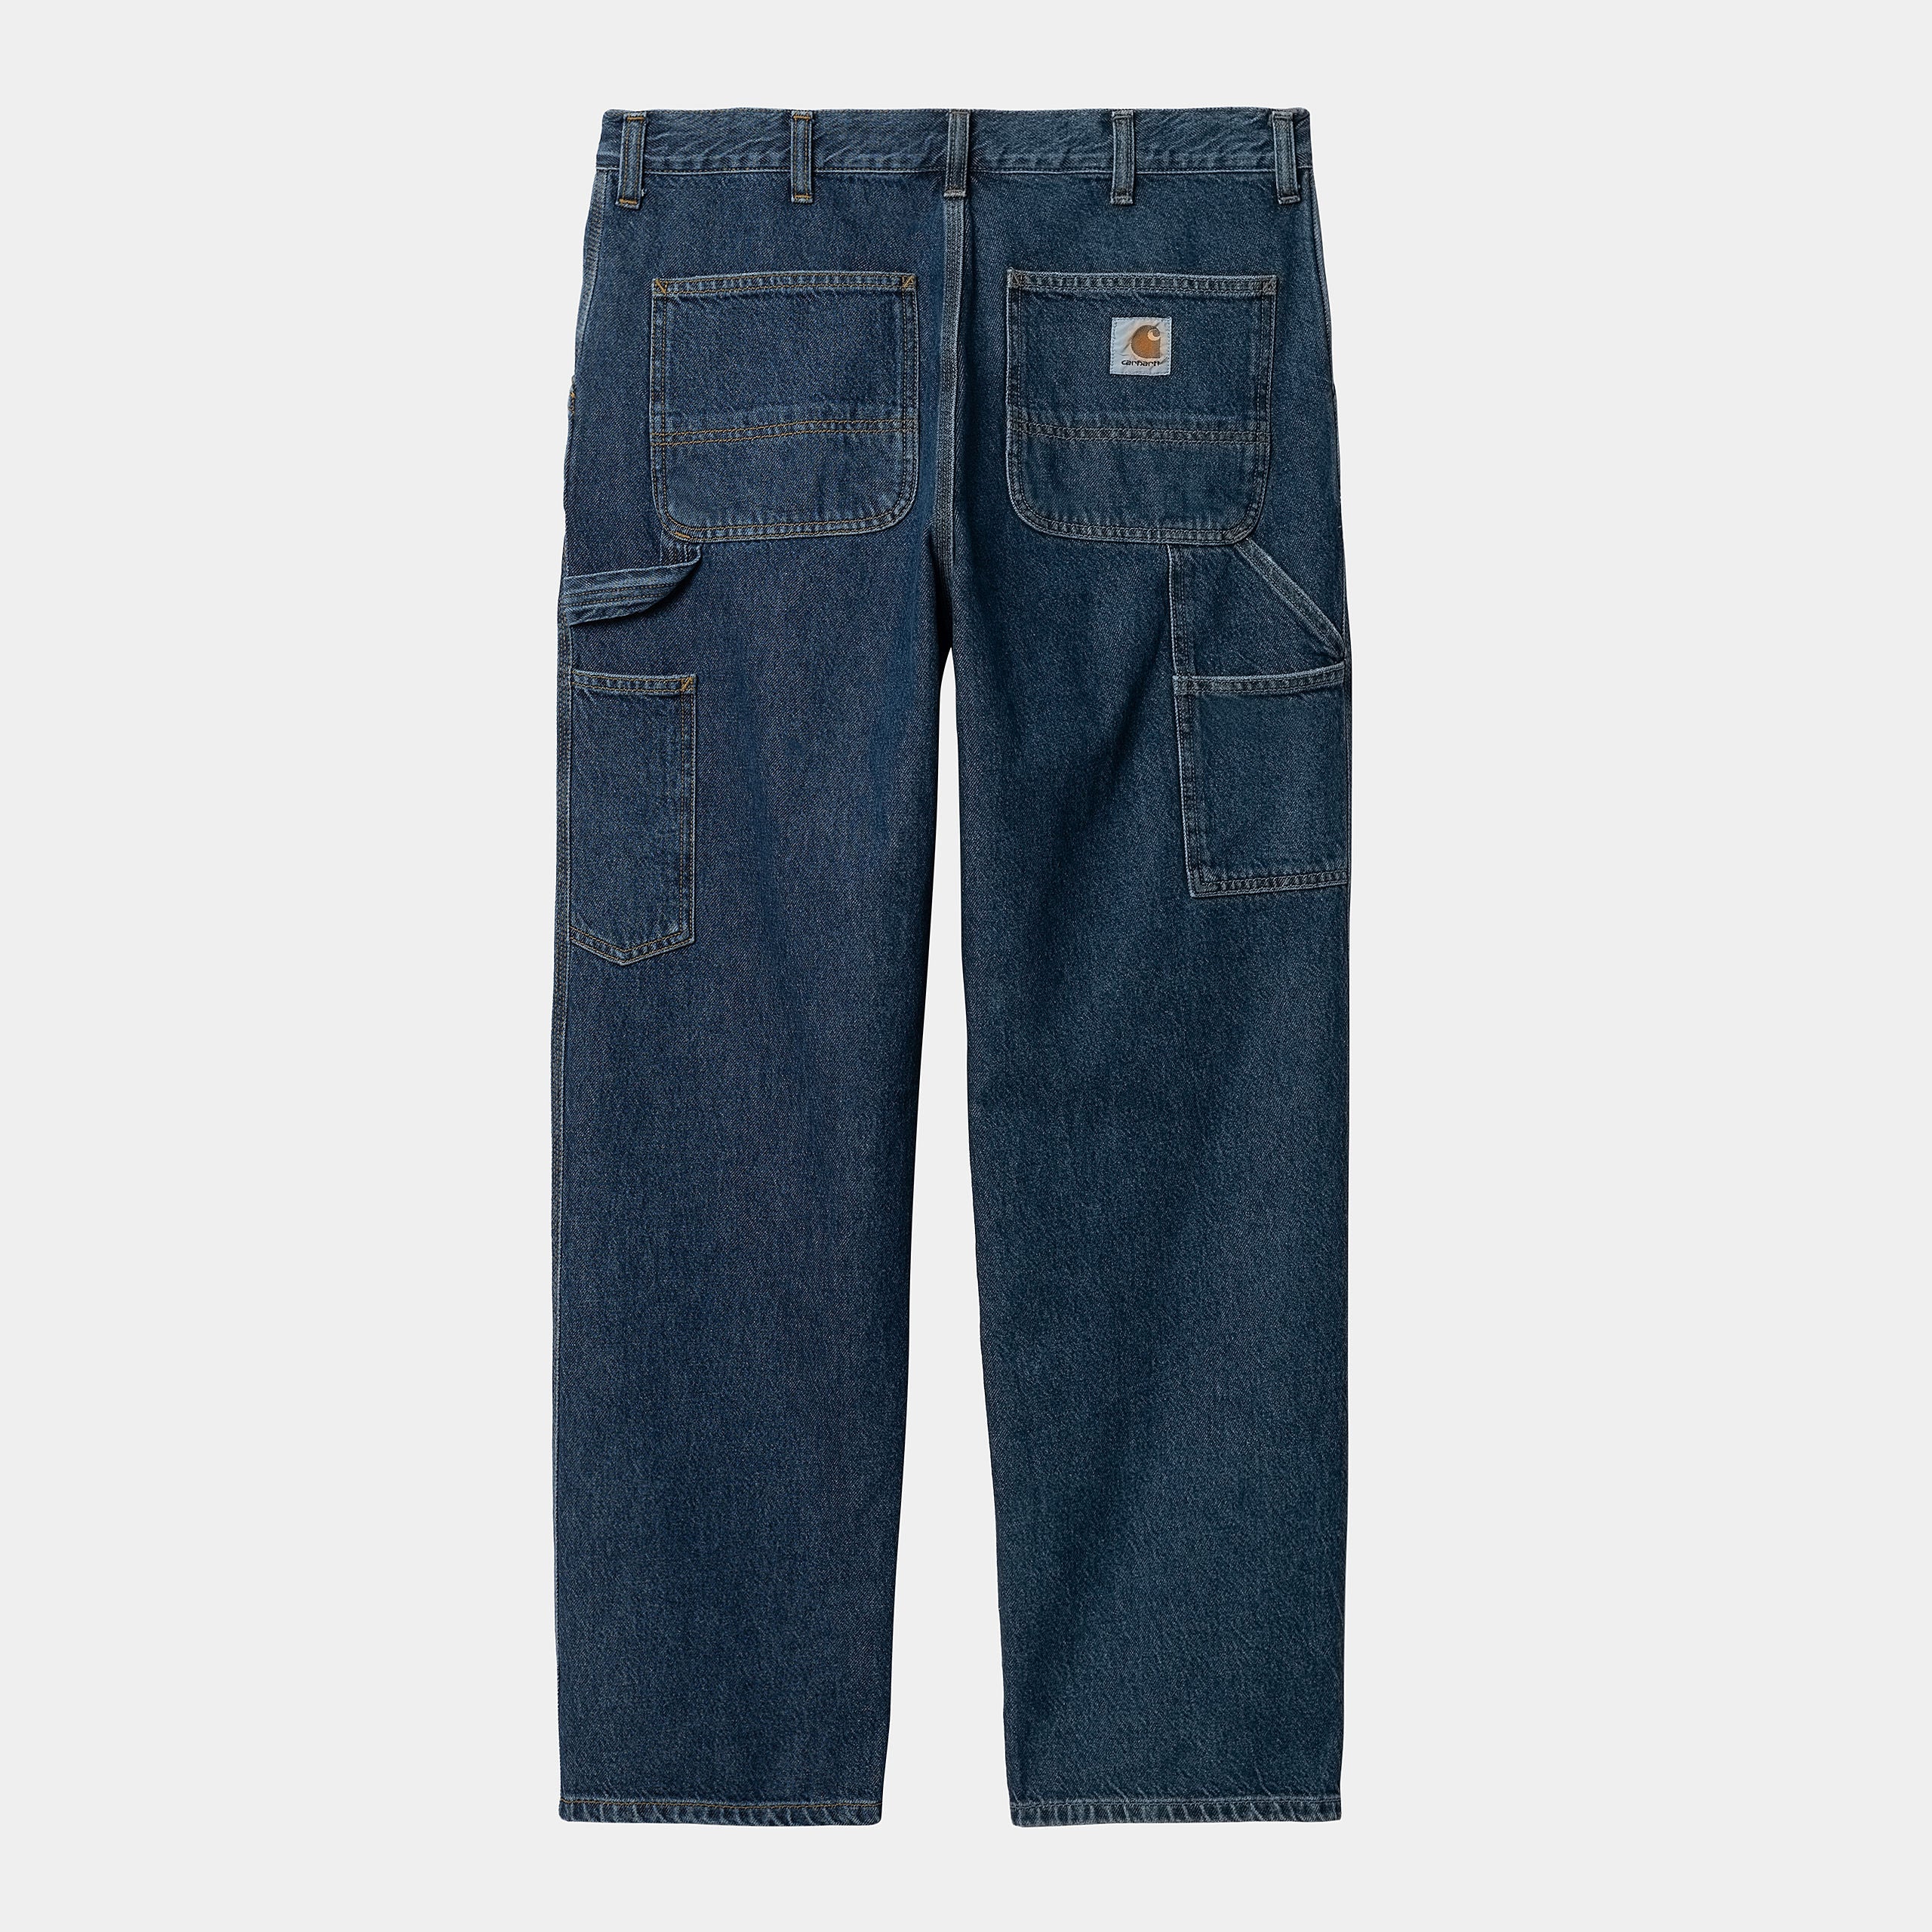 Carhartt WIP   Single Knee Pant 100% Cotton Smith Denim Stone Bleached and Stone Wash